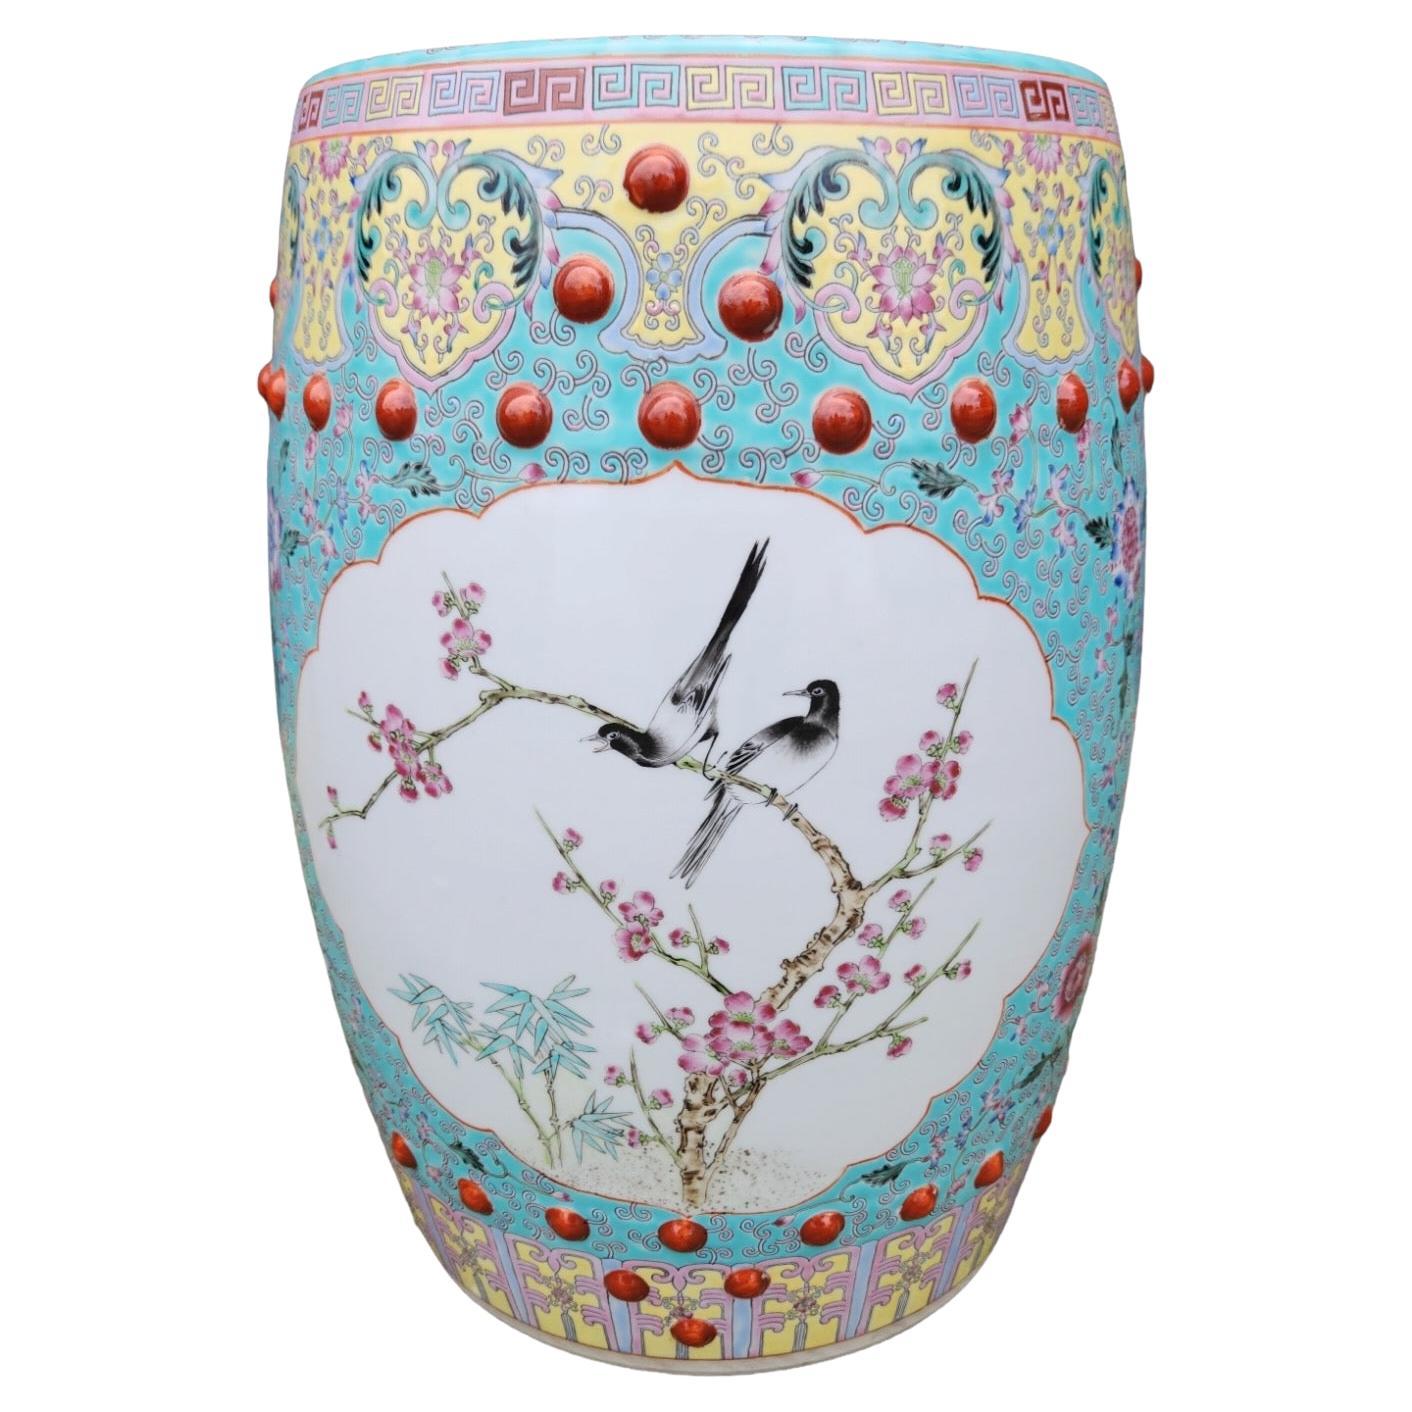 1900s Chinese Garden Stool For Sale